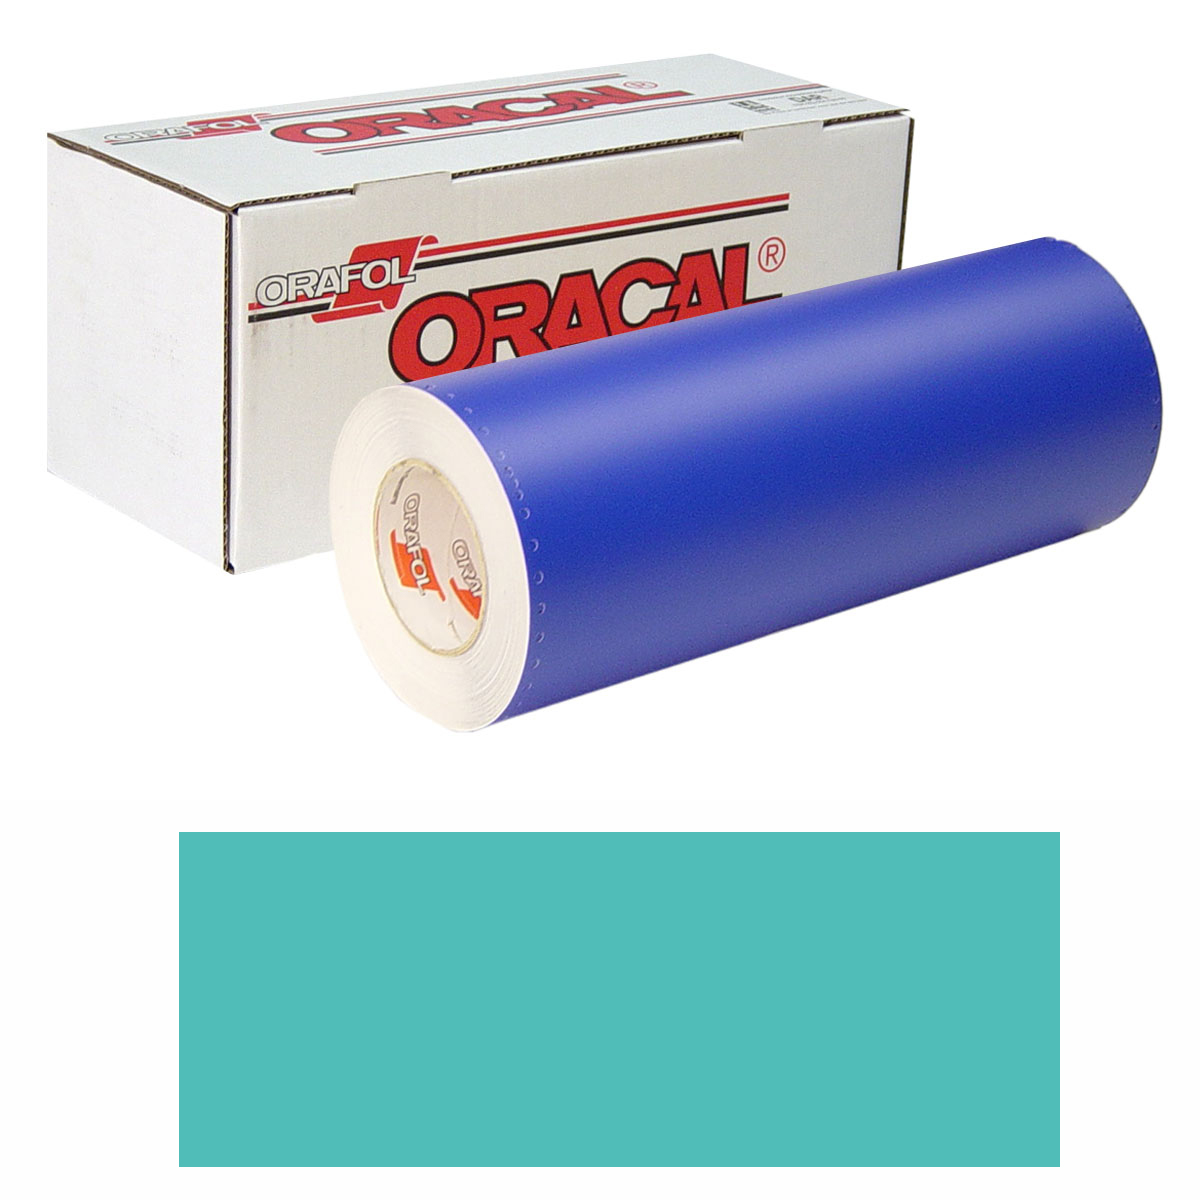 ORACAL 8300 Unp 48in X 50yd 054 Turquoise